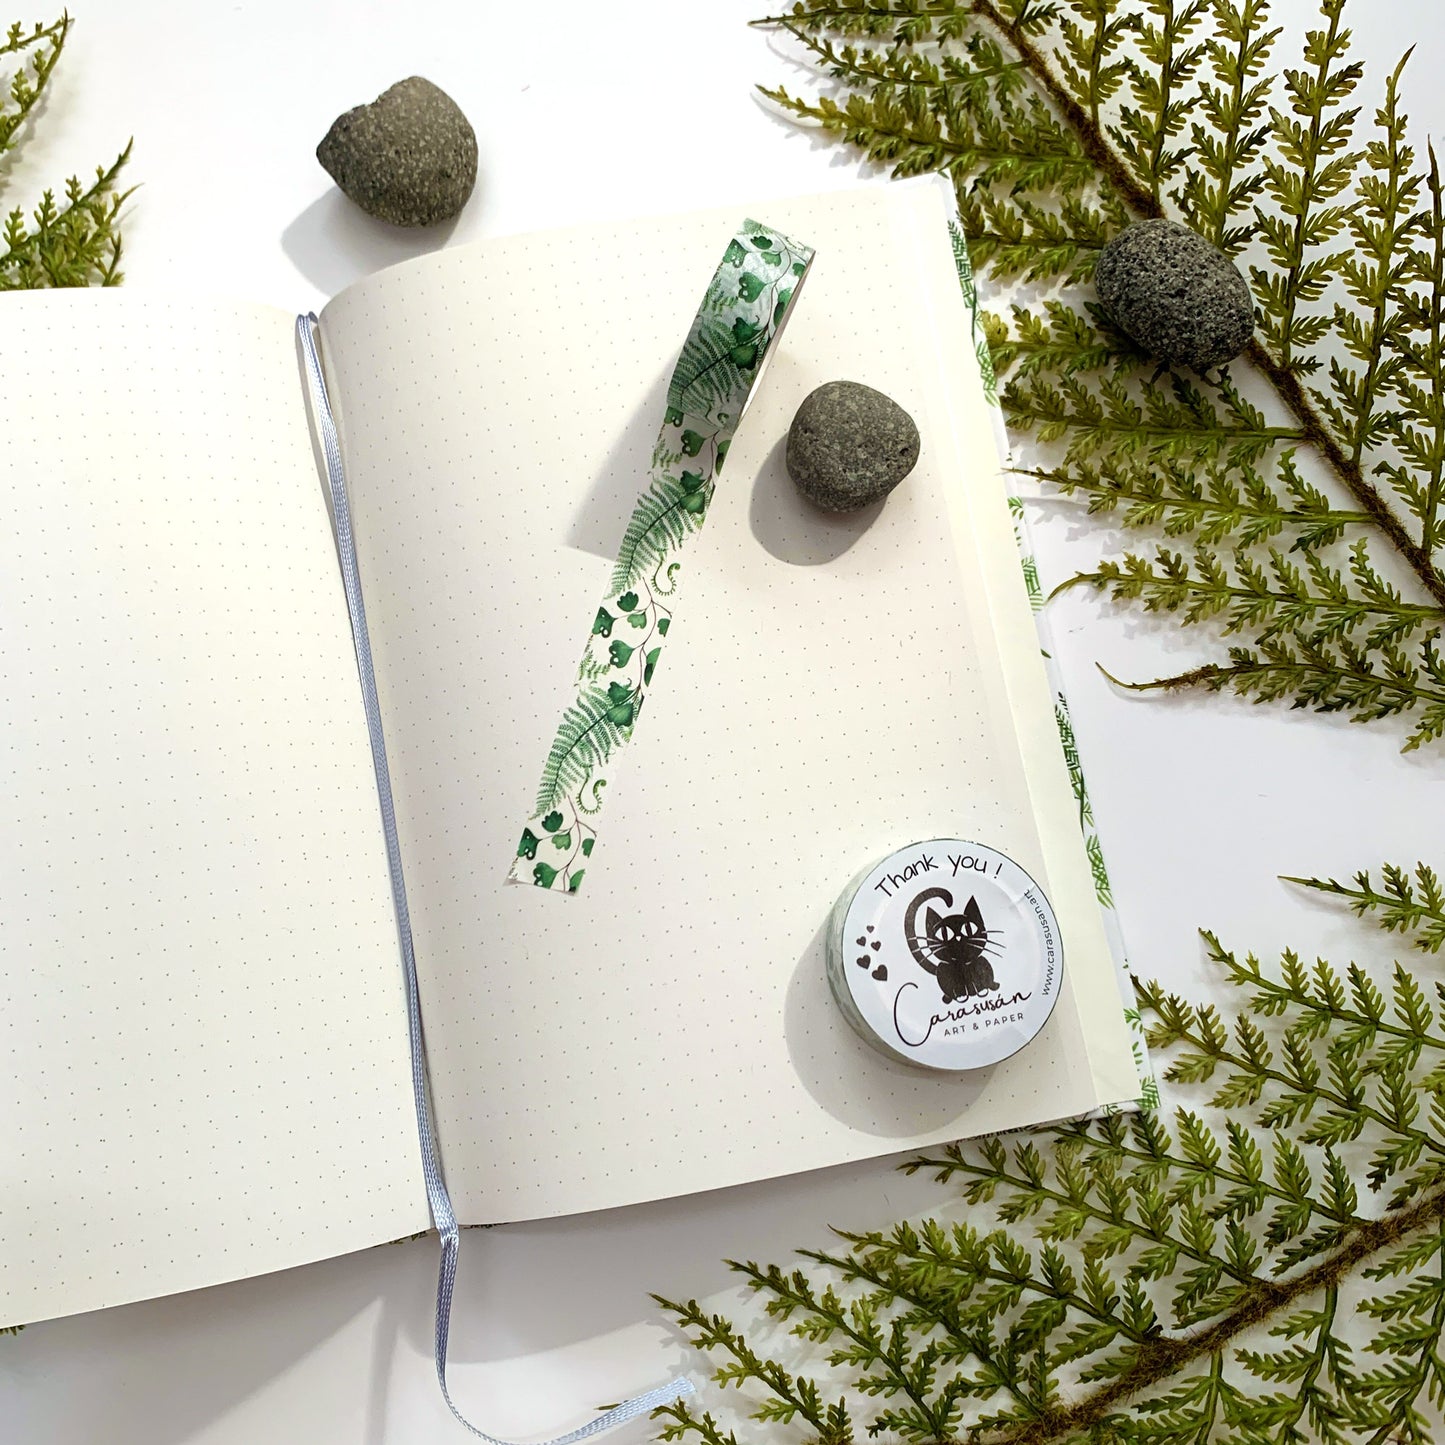 Dot Grid Notebook with fern motifs and gold foil print - white Bullet Pattern Journal DinA5